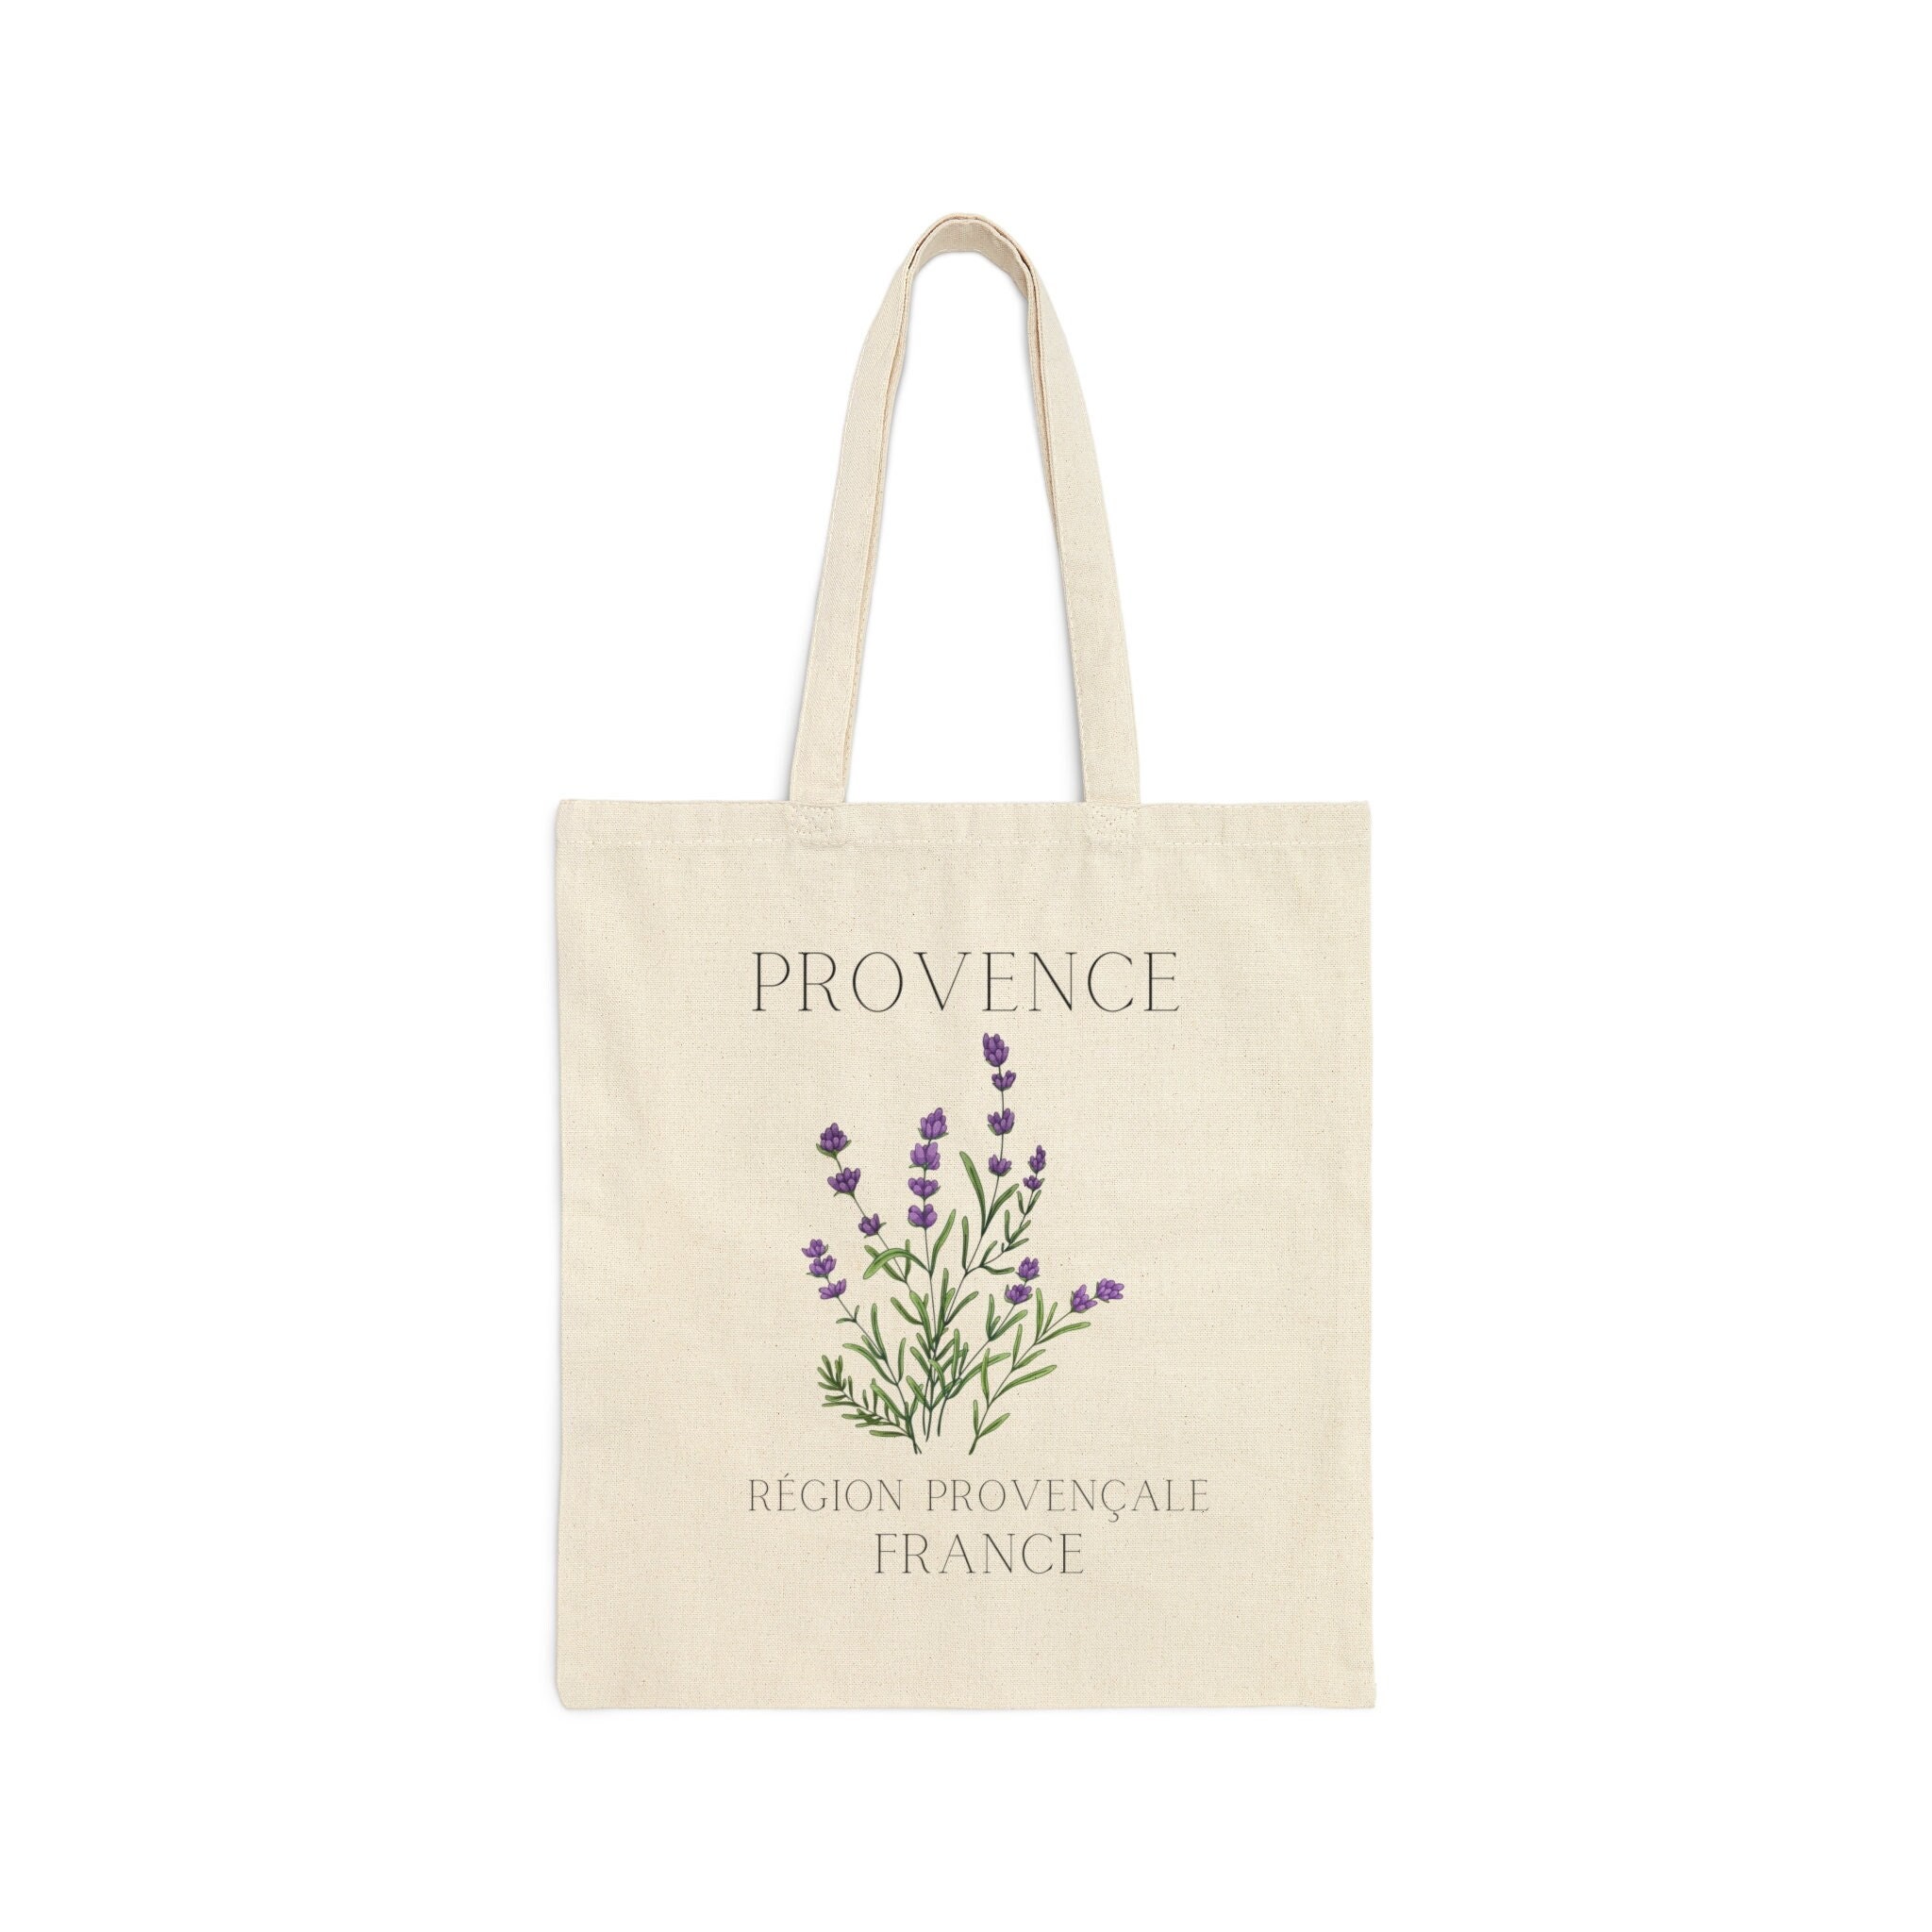 Provence Flower Market Tote Bag - Ruffled Feather